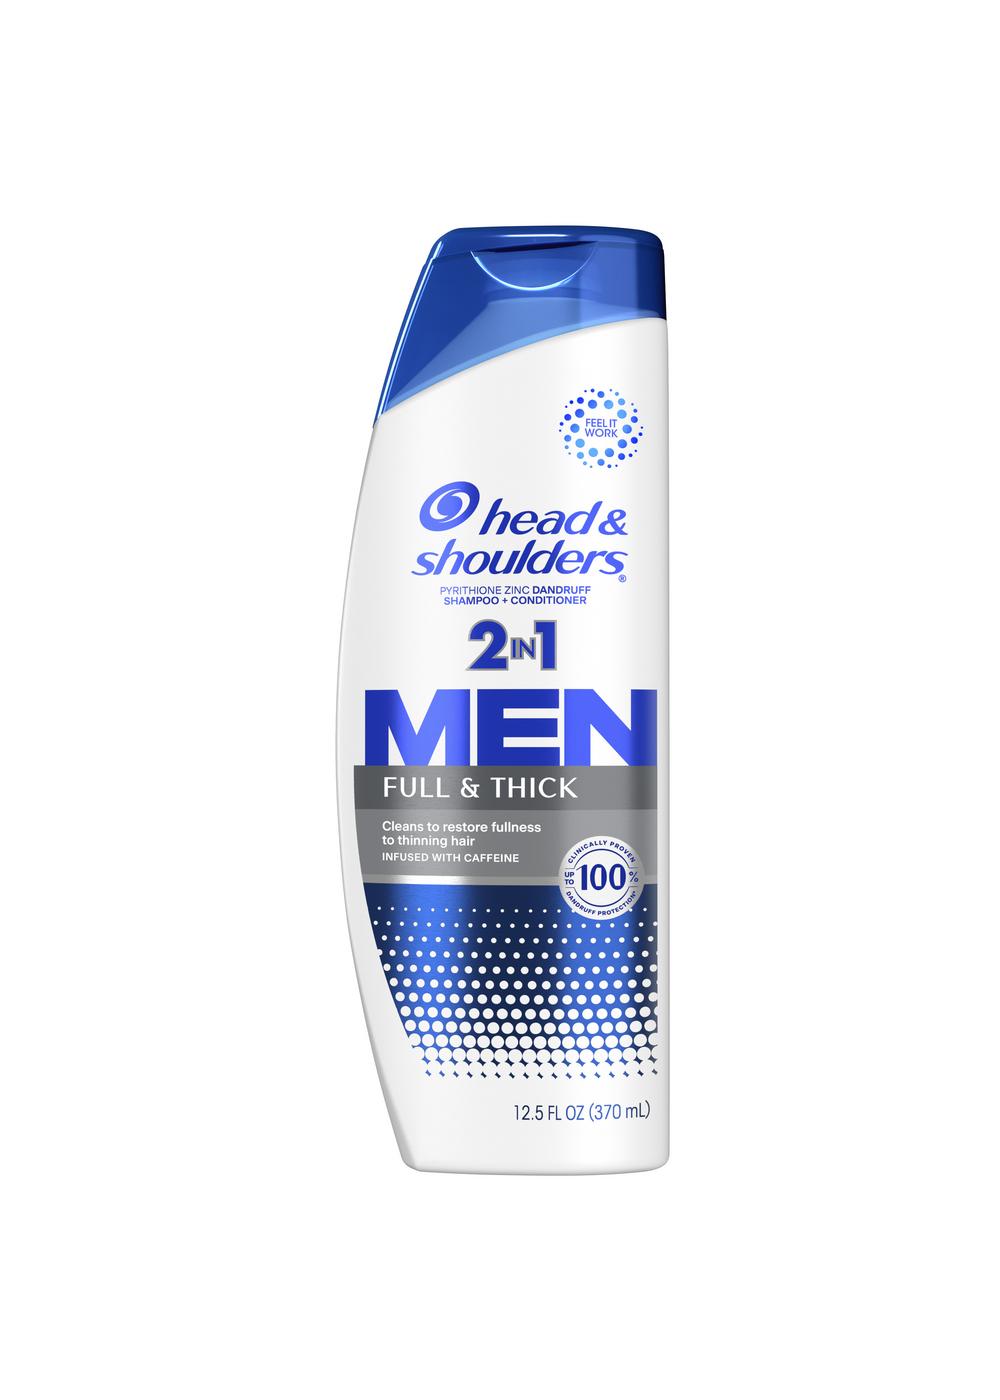 Head & Shoulders 2 in 1 Men Dandruff Shampoo + Conditioner - Full & Thick; image 1 of 11